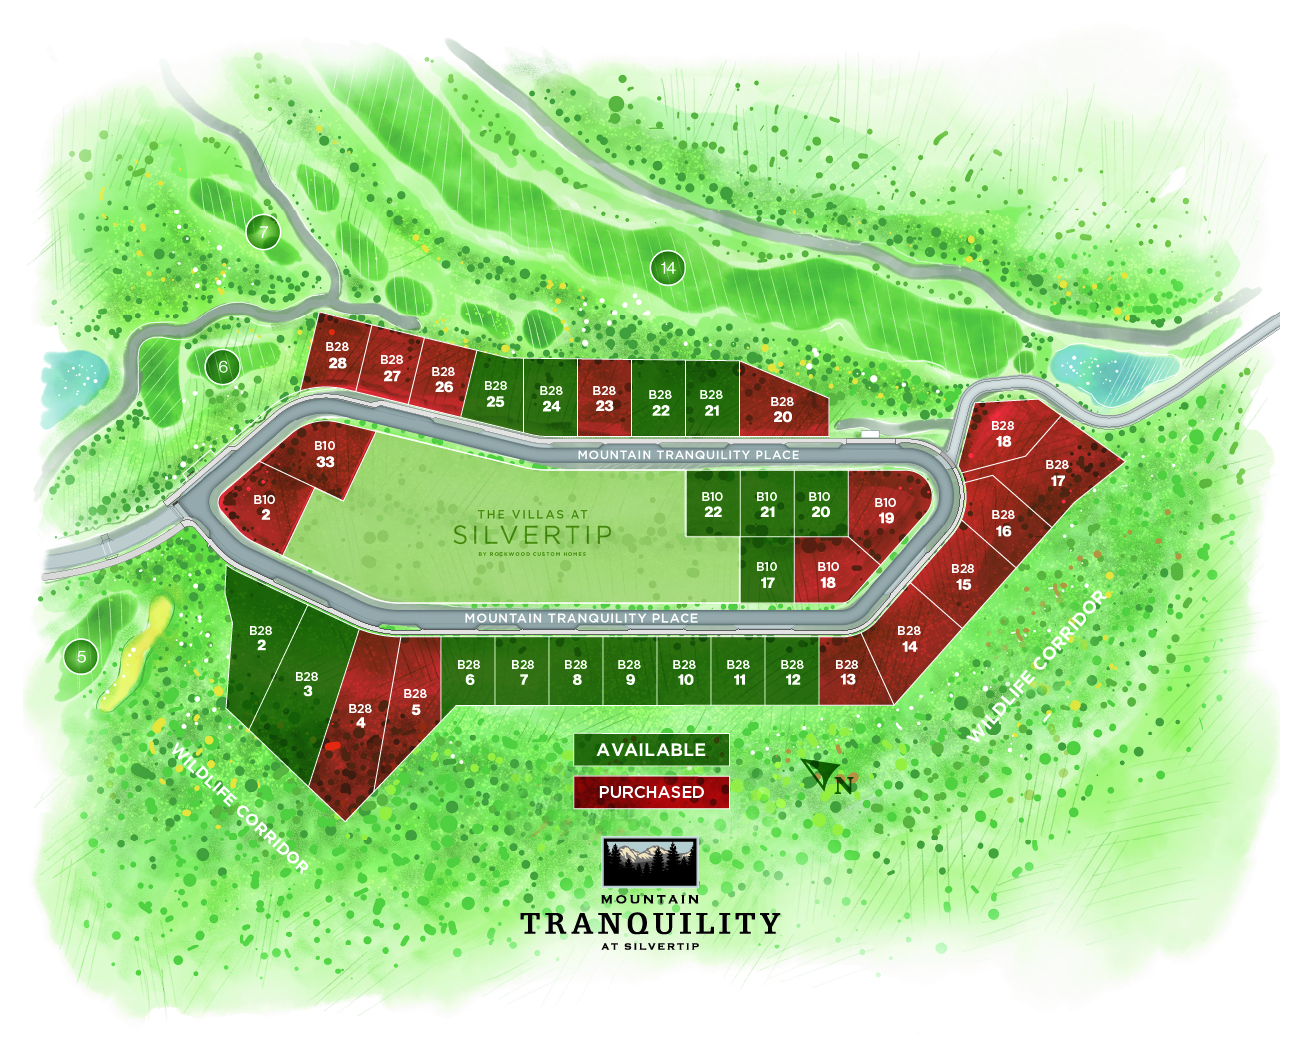 Mountain Tranquility homesites are selling quickly.